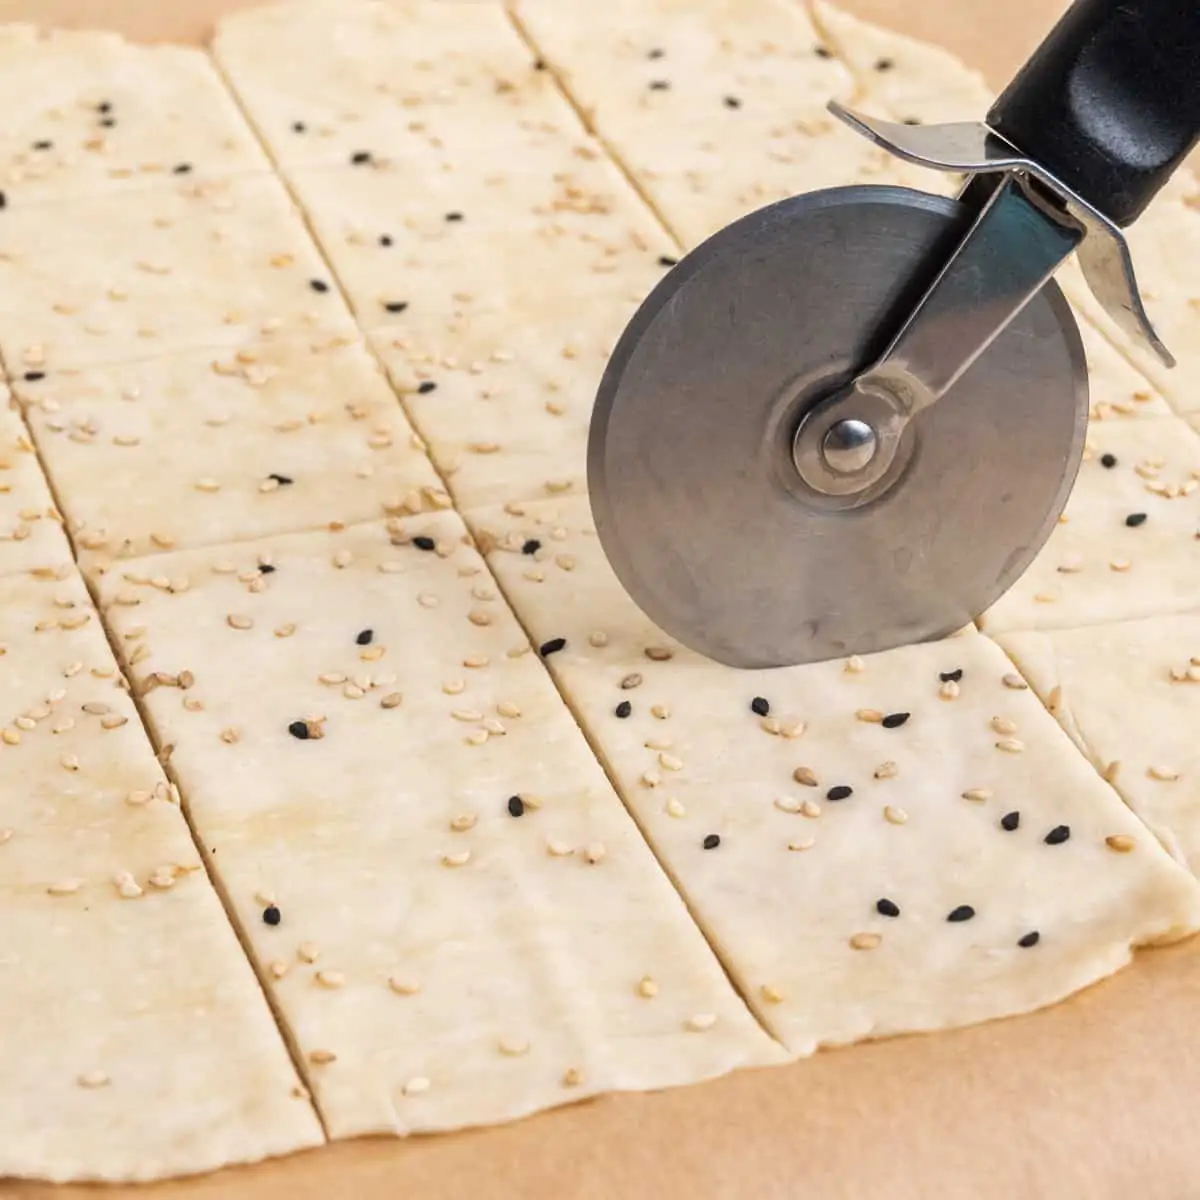 Cutting crackers into squares with a pizza roller.